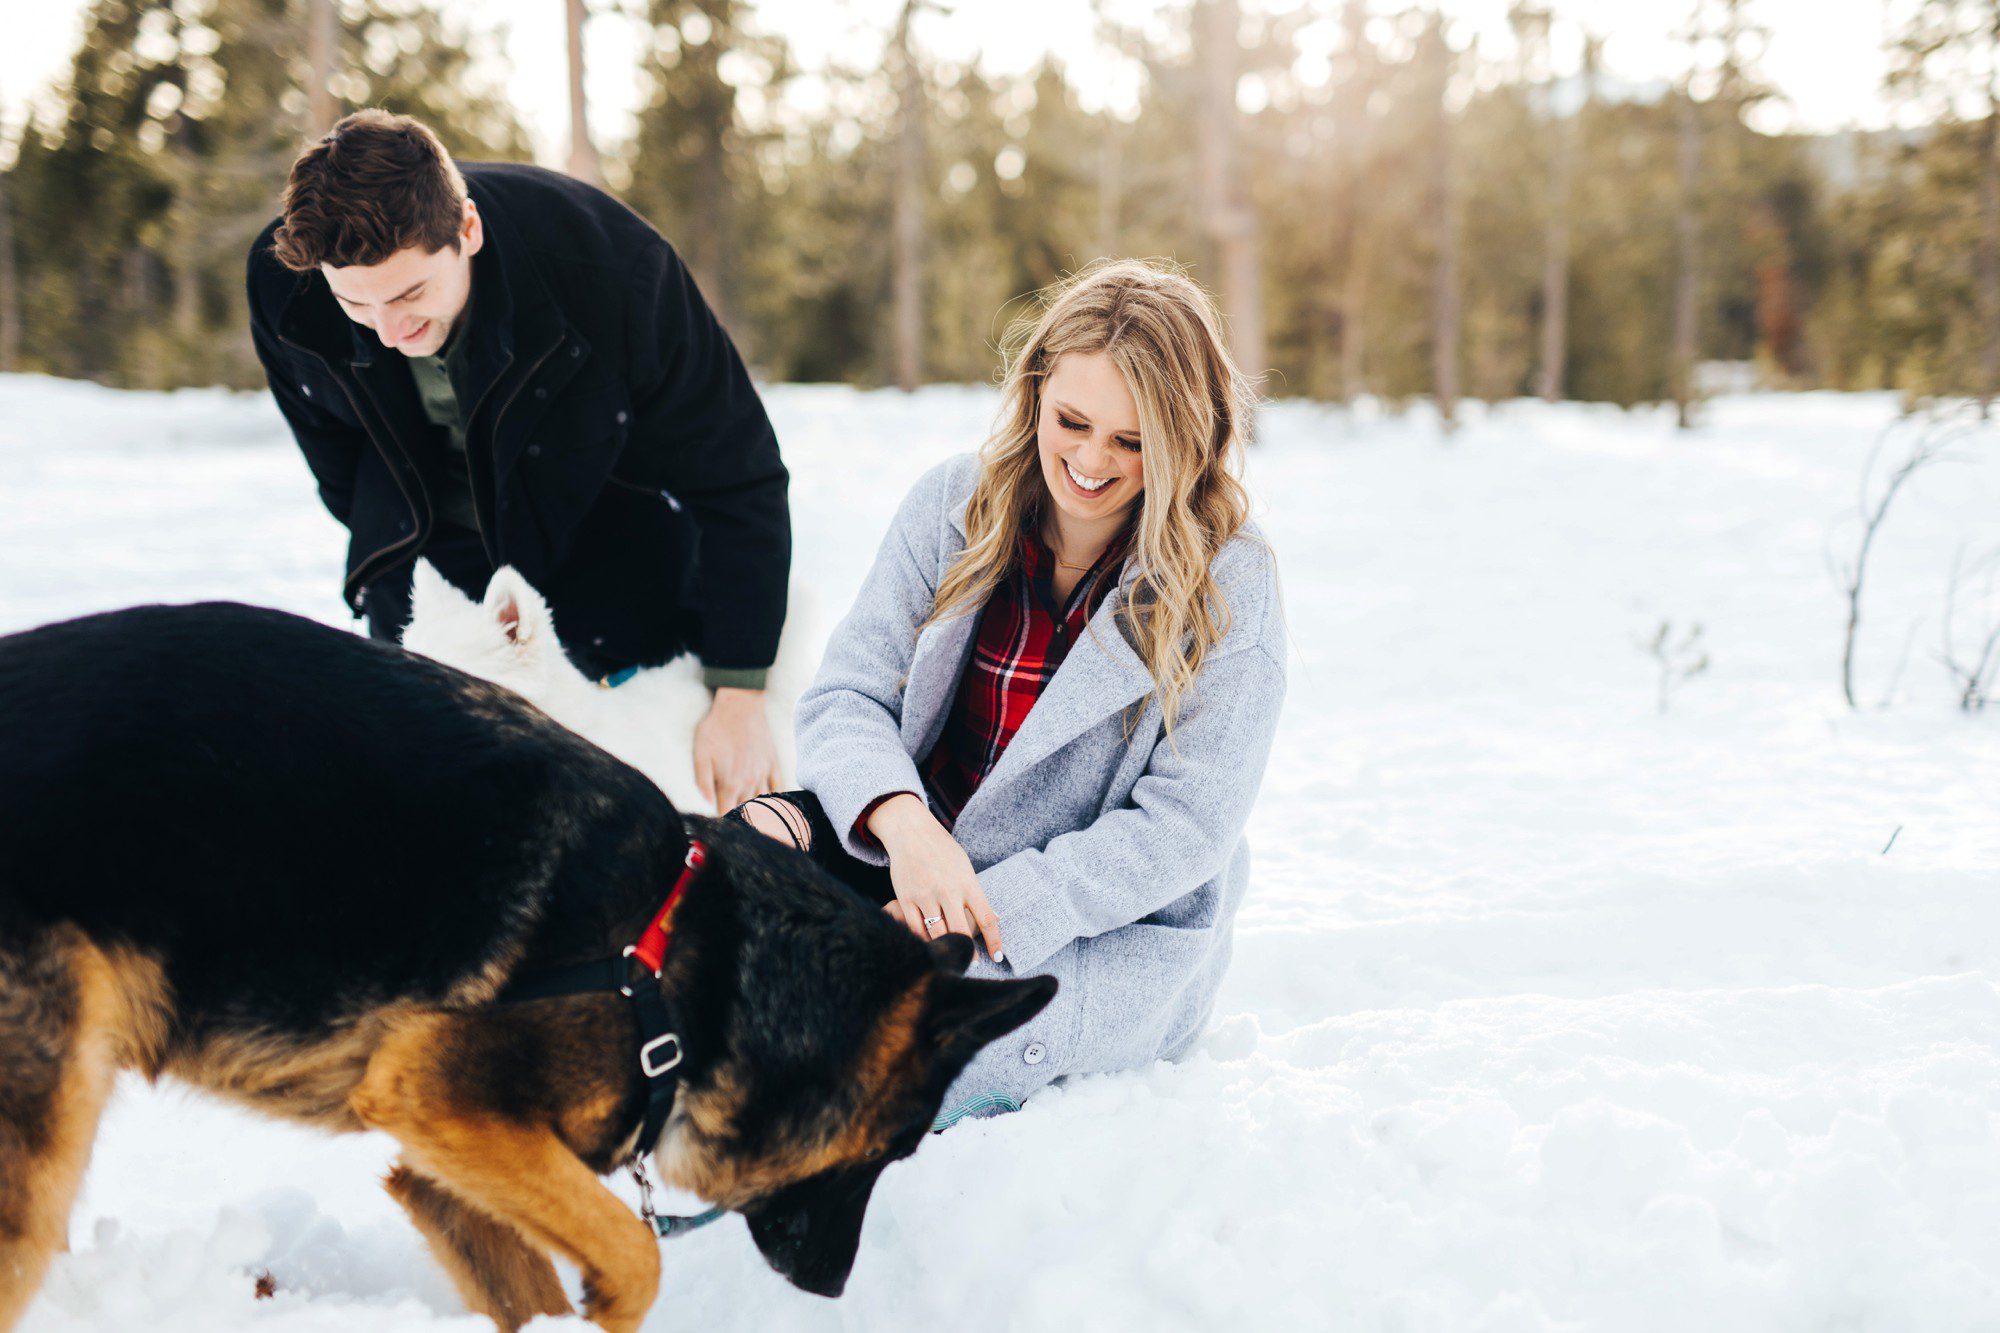 Snowy engagement session at Kapaka Snow Park